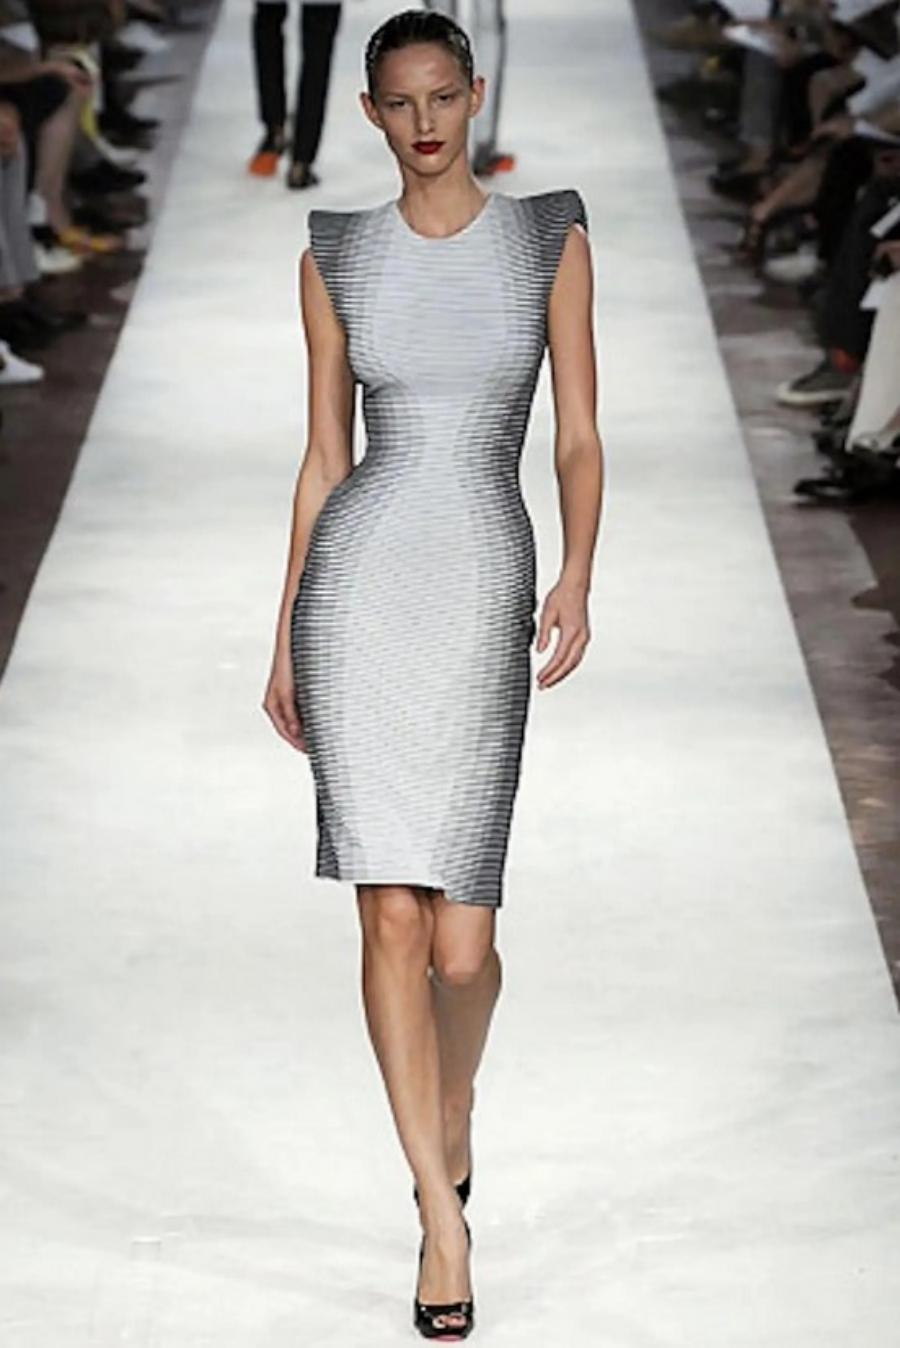 Alexander Mcqueen Optical Illusion Striped Runway Resort Collection 2009 Dress For Sale